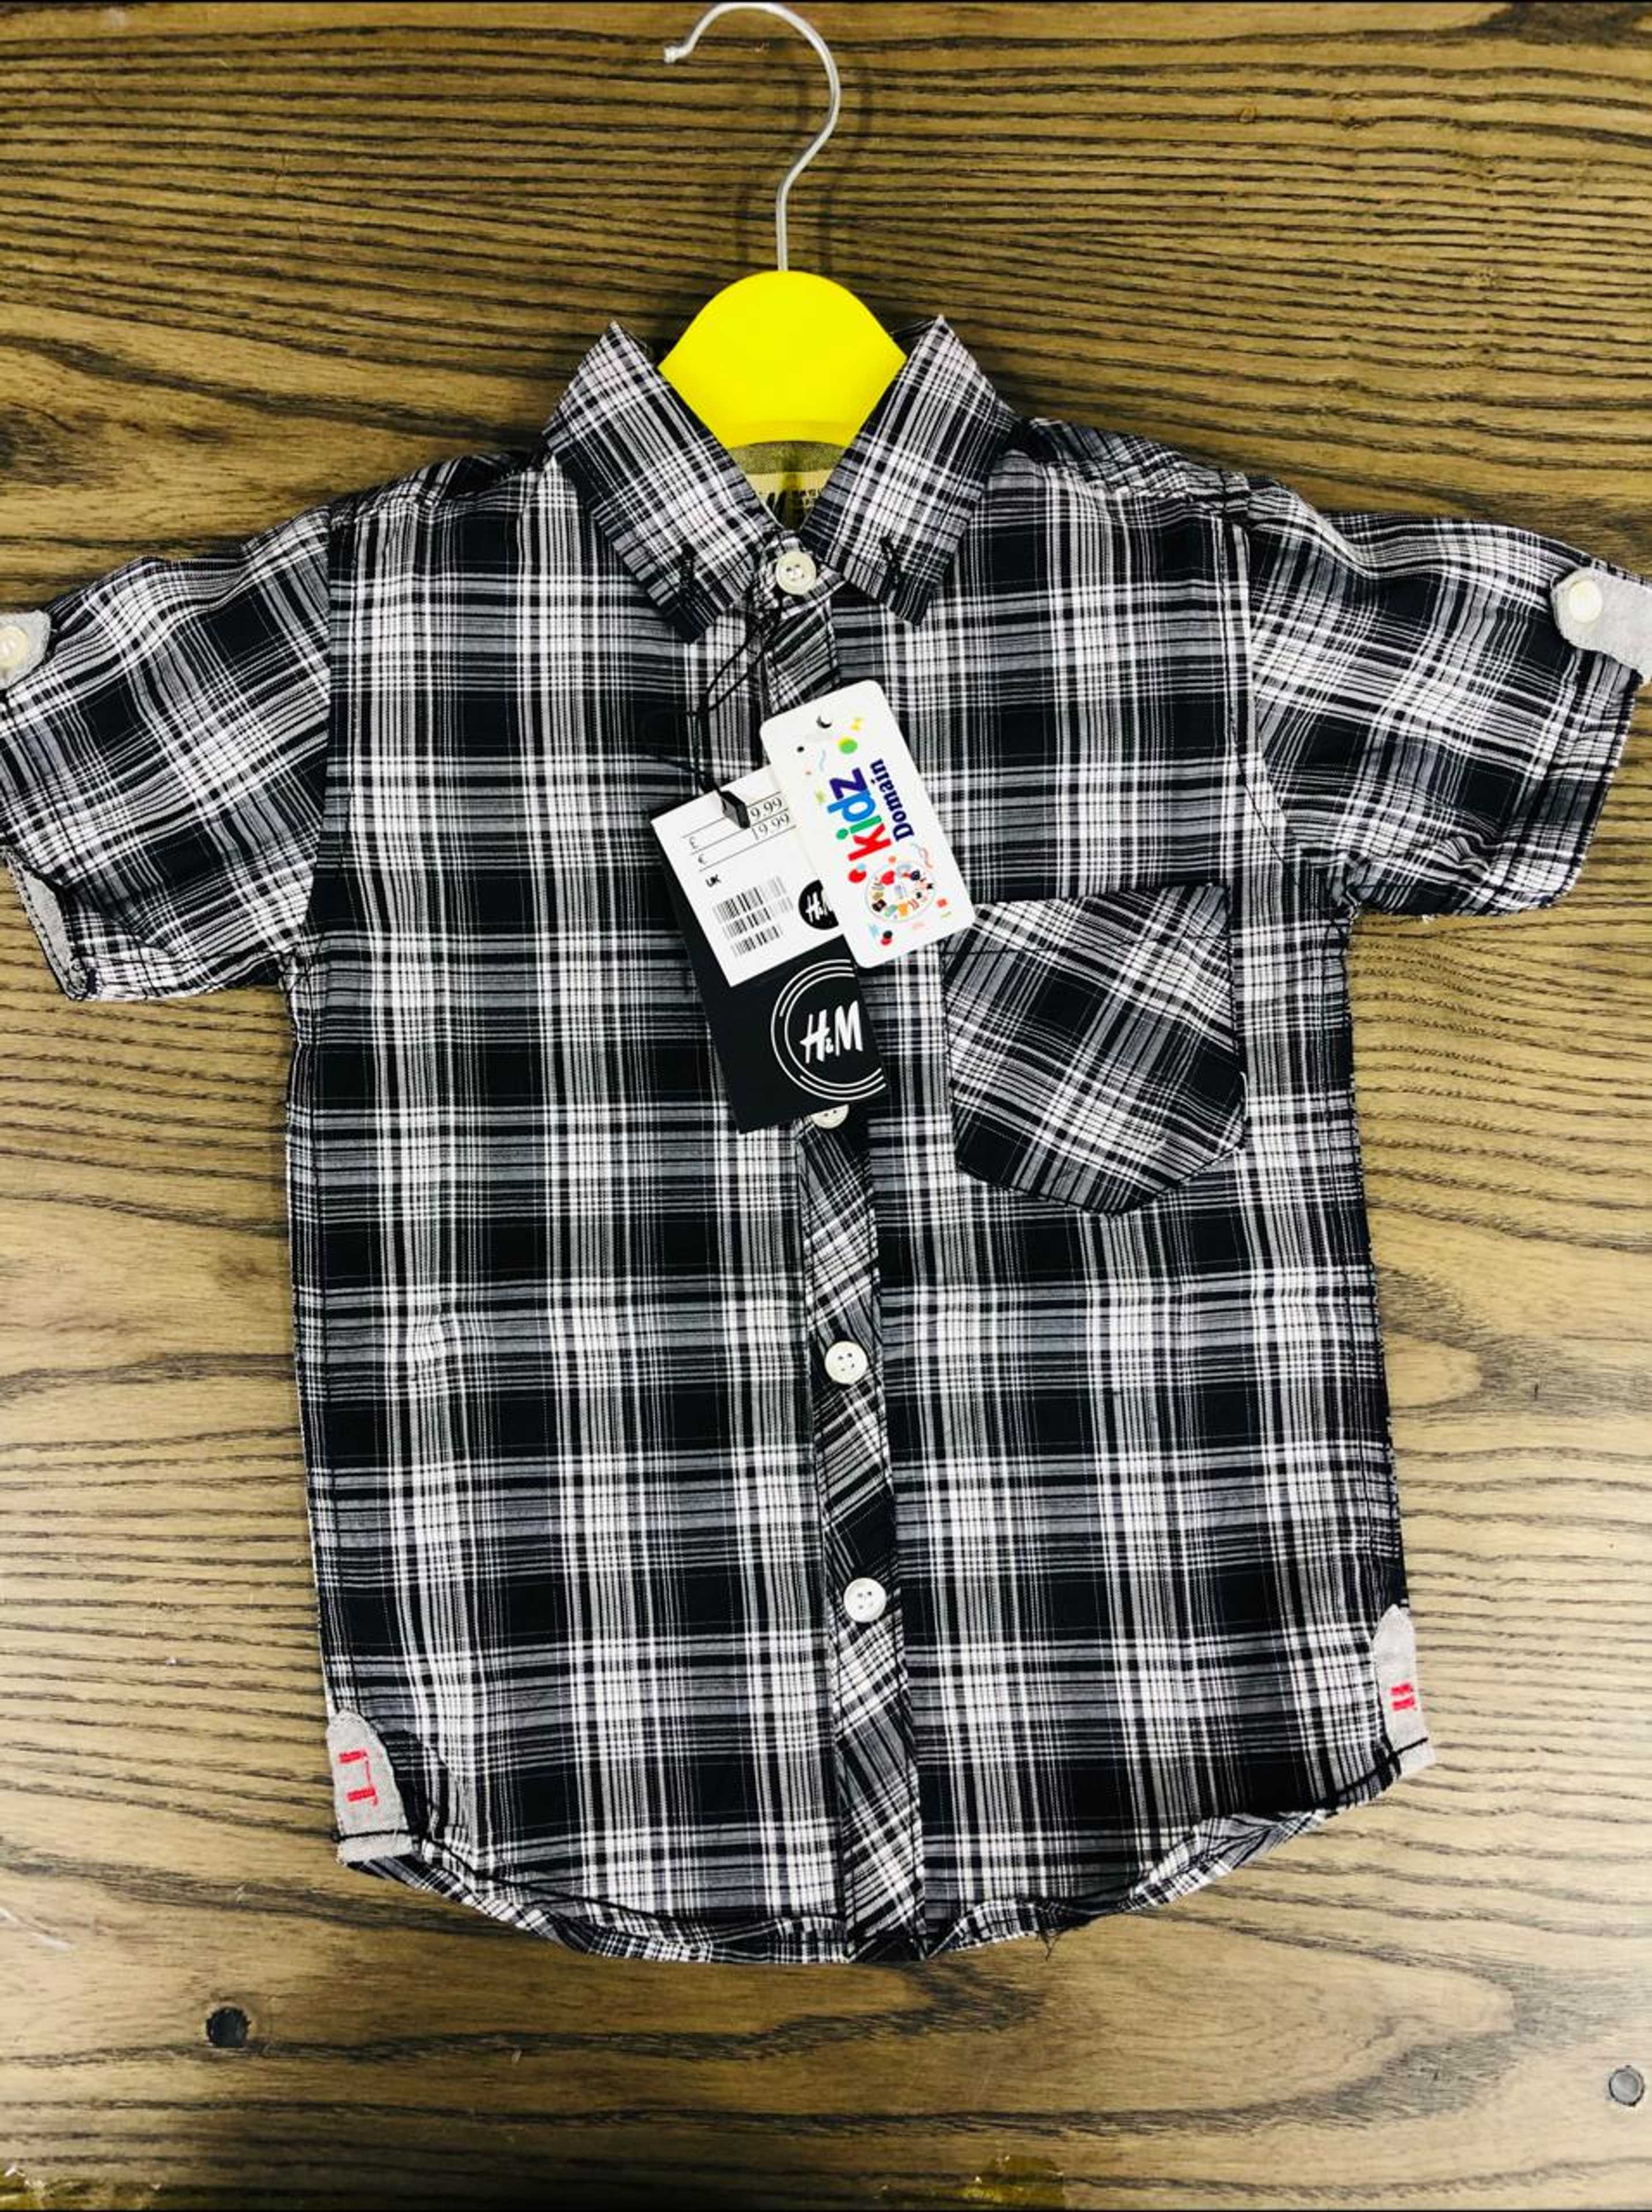 black and white check shirt 3 to 9 months